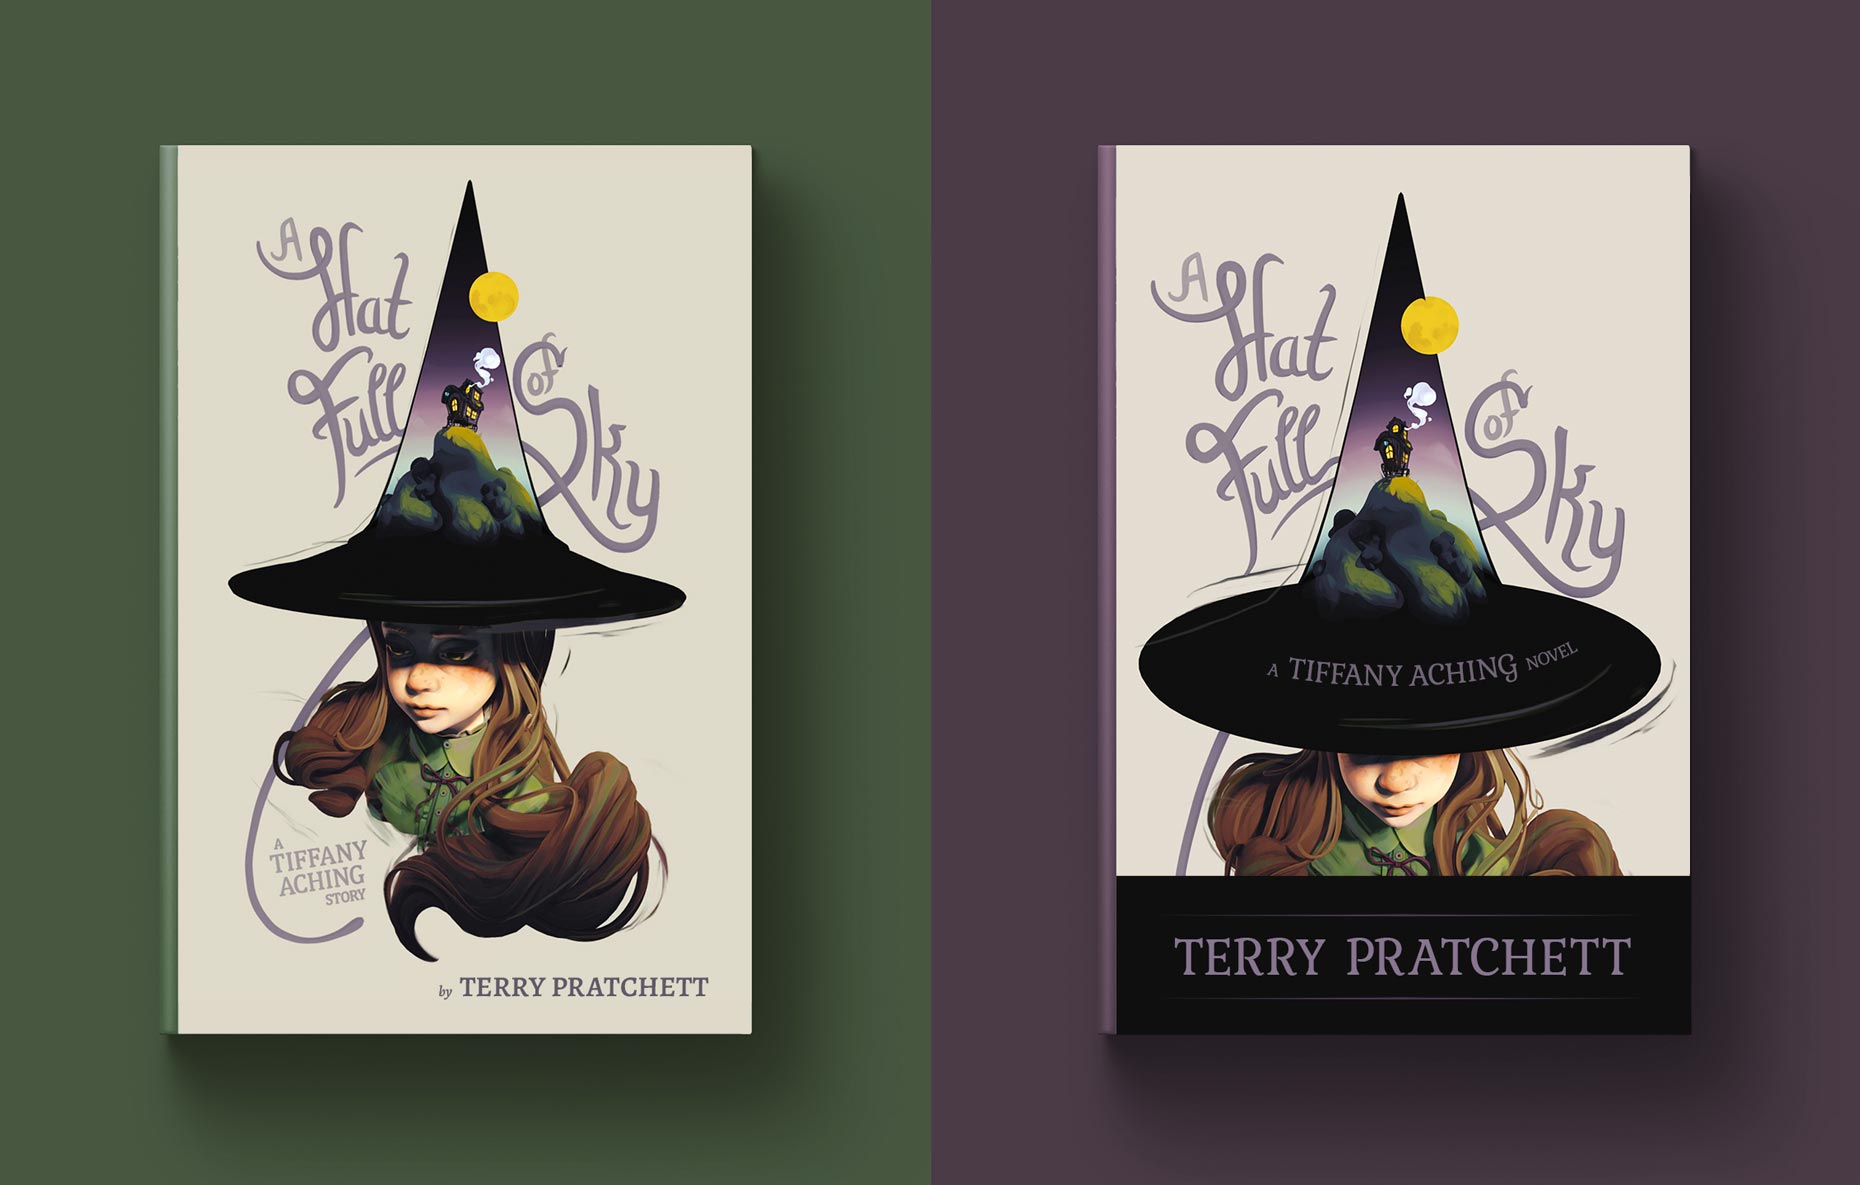 Faux book cover design sketches (rough comps) for 